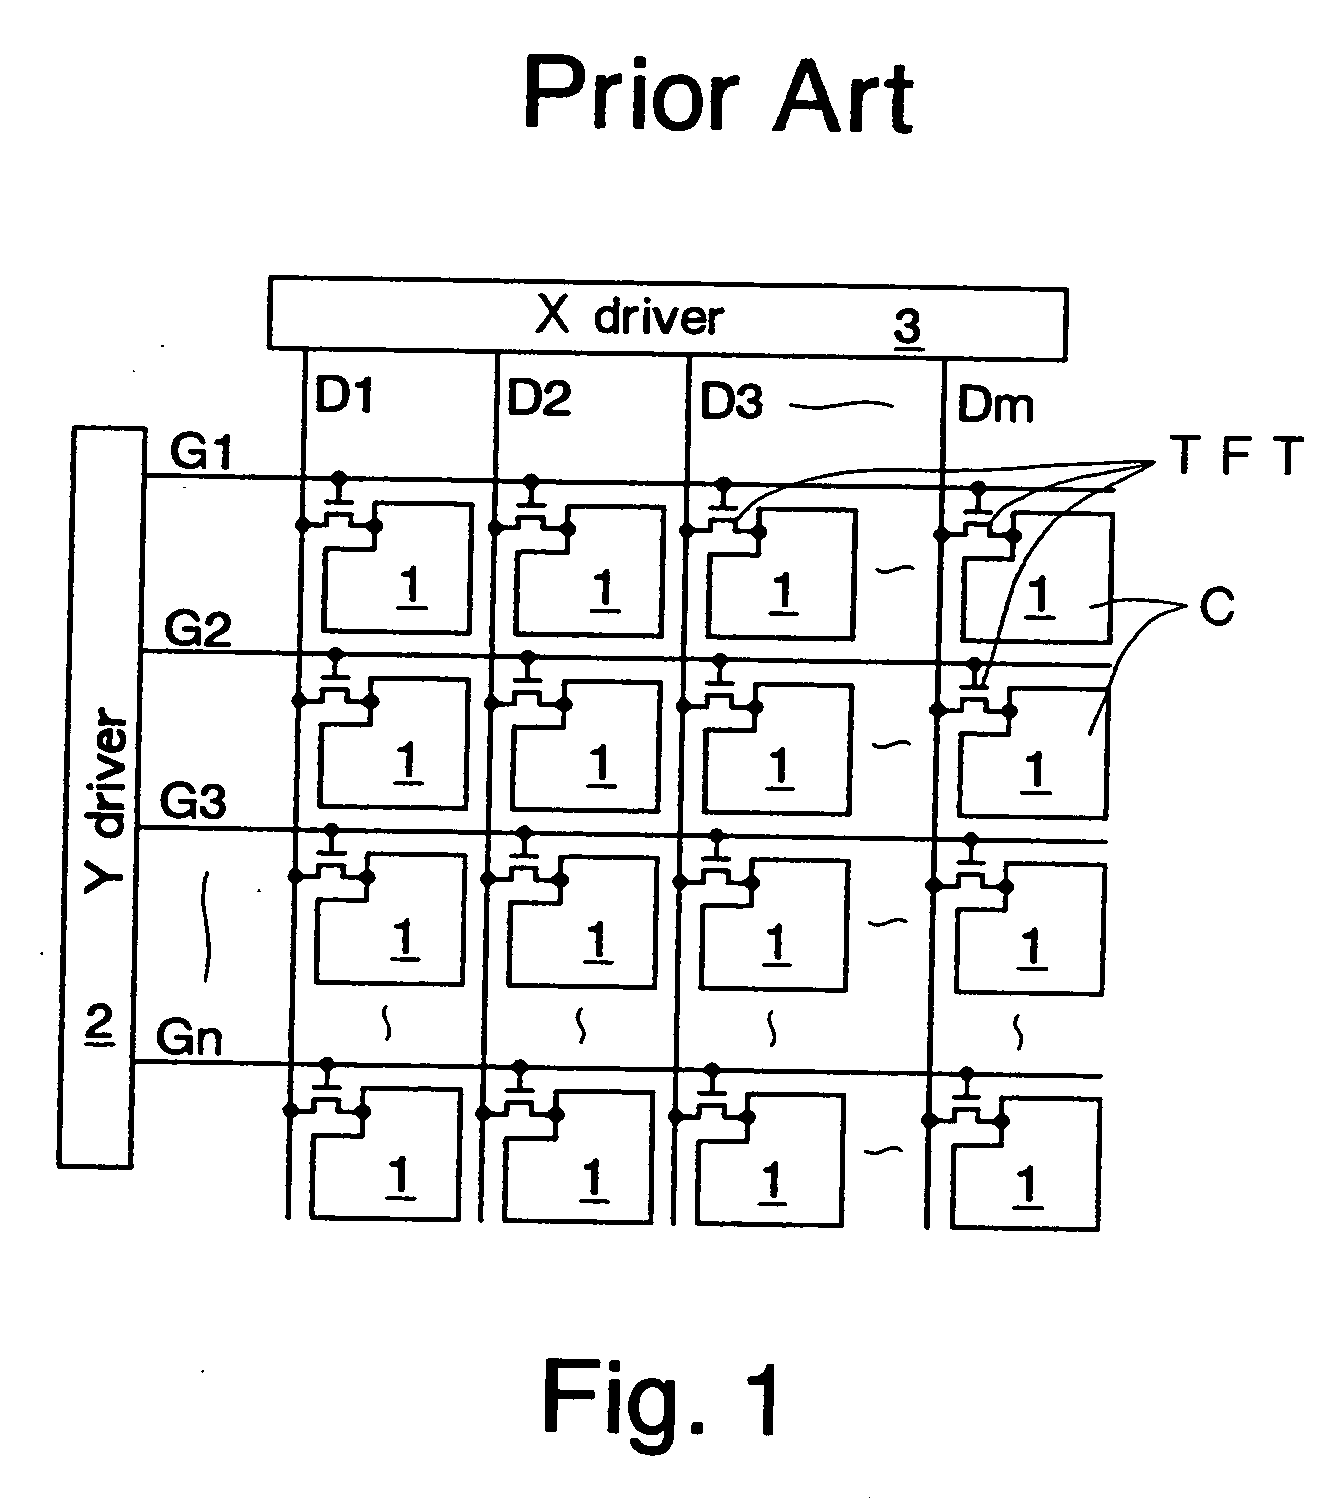 Apparatus and method to improve quality of moving image displayed on liquid crystal display device